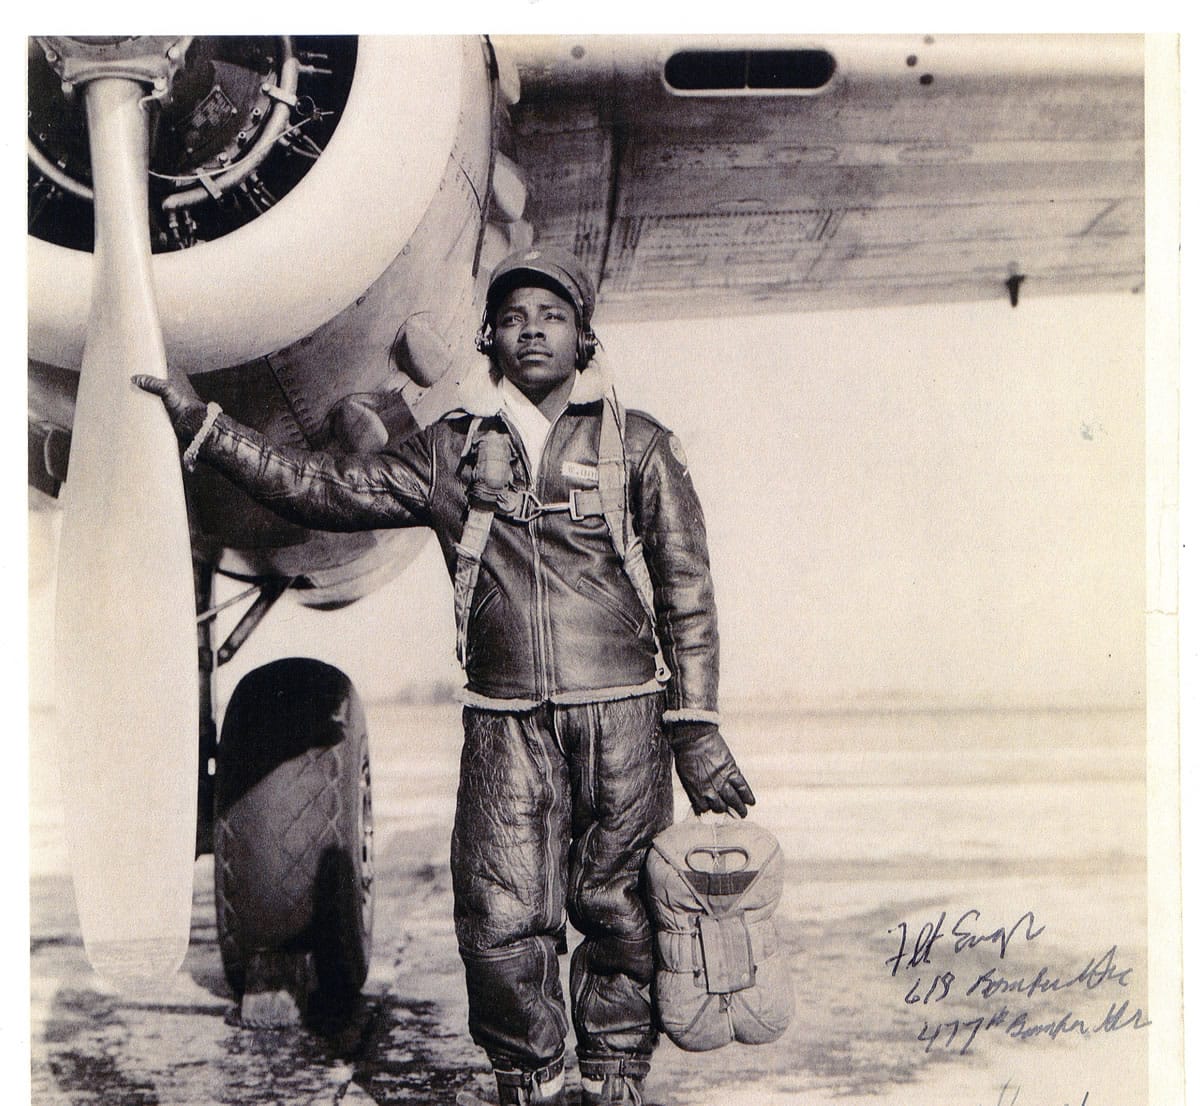 Tuskegee Airman William L. Booker, one of the first black military aviators, died Nov.